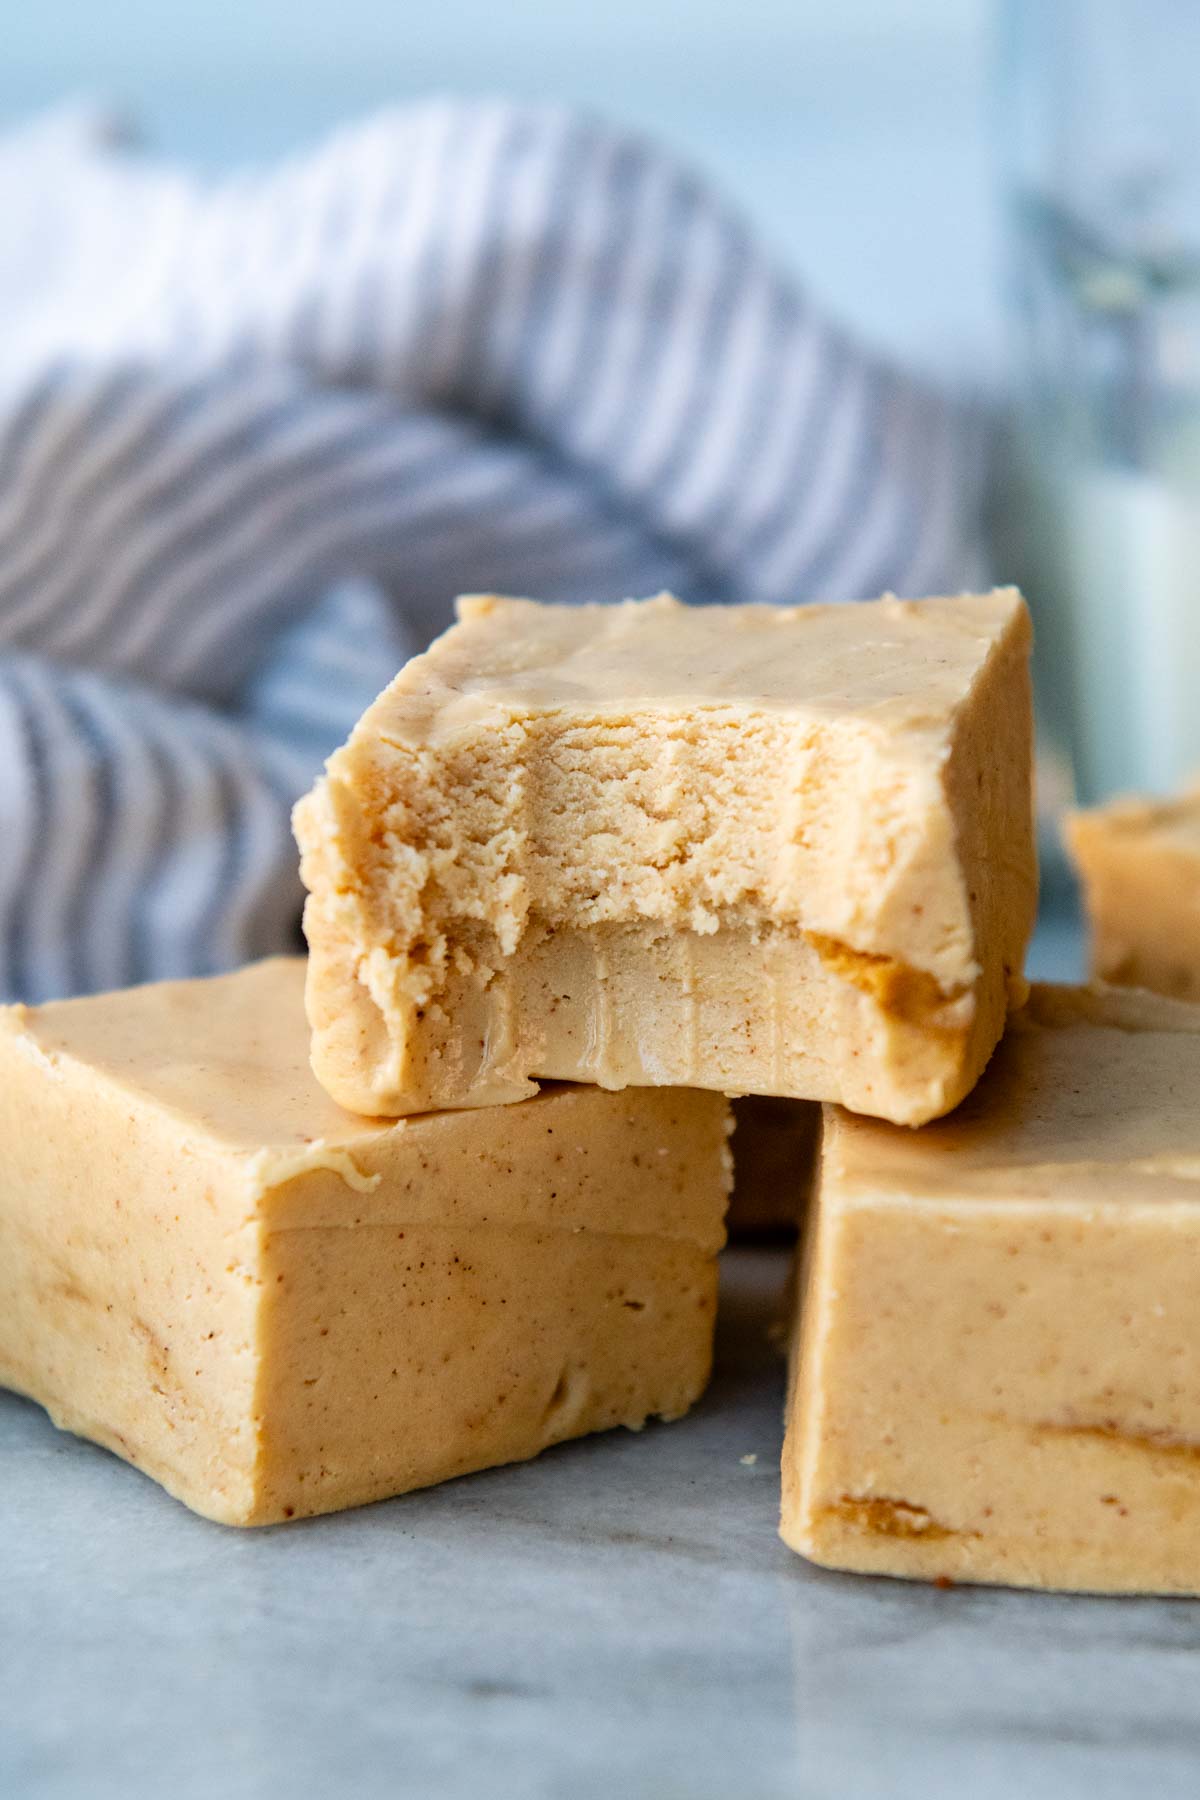 peanut butter fudge with a bite taken out.